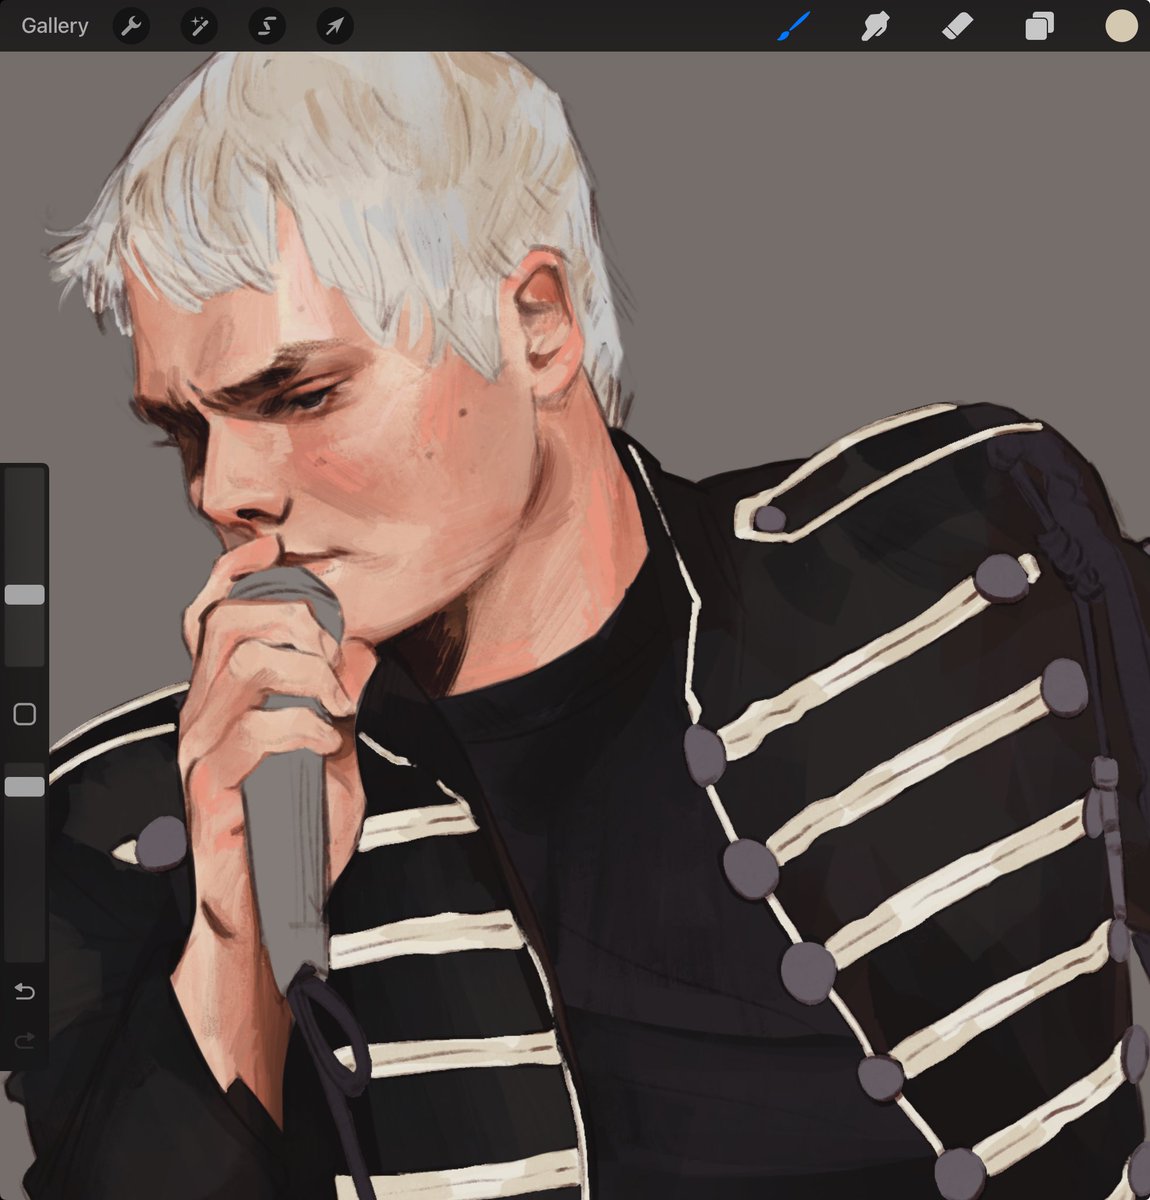 wip // my emo phase is never ending huh